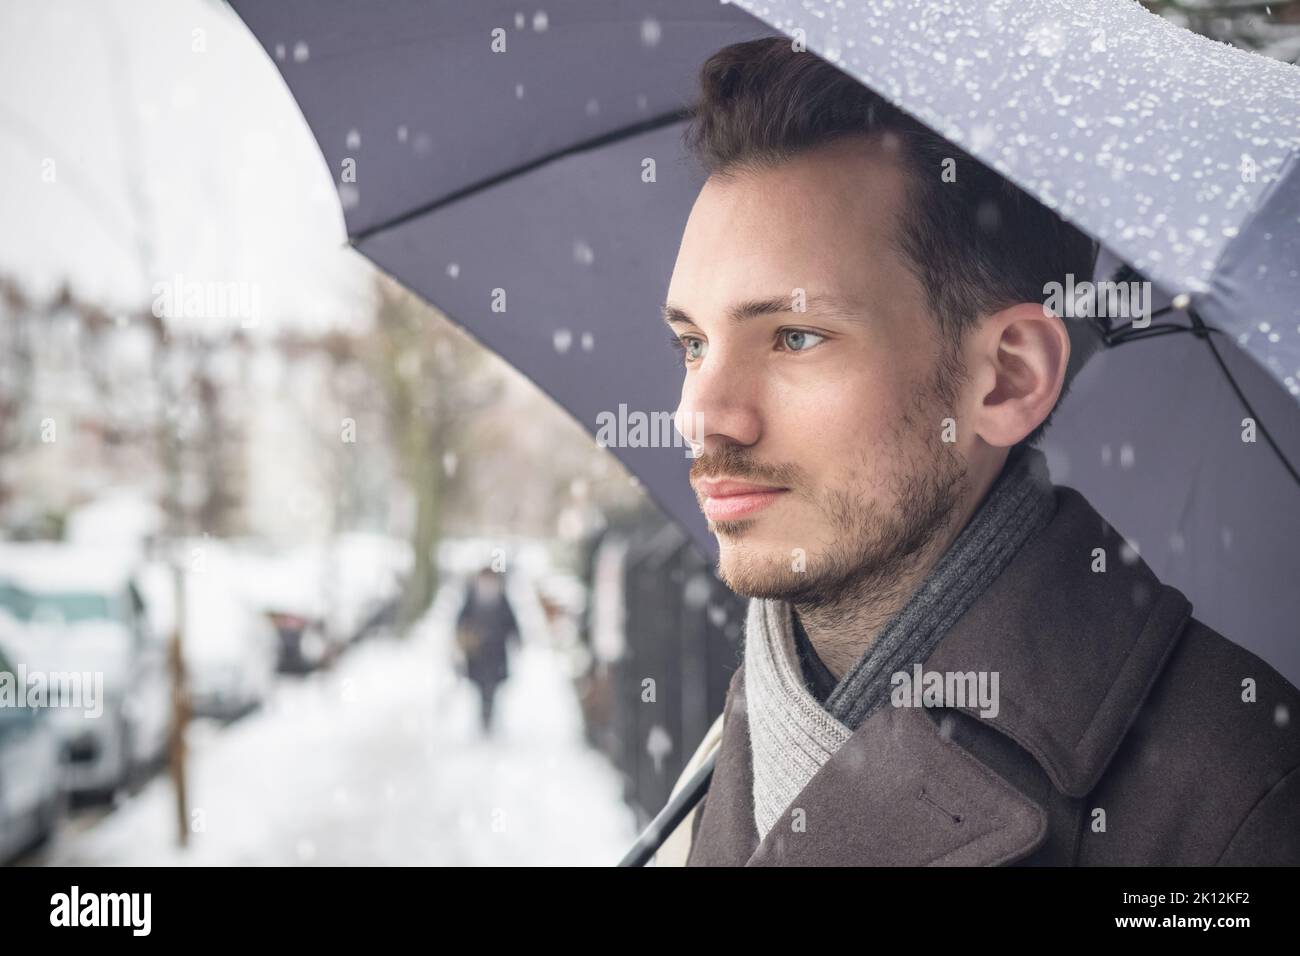 Portrait of a thoughtful young man with umbrella on London street in winter snow Stock Photo